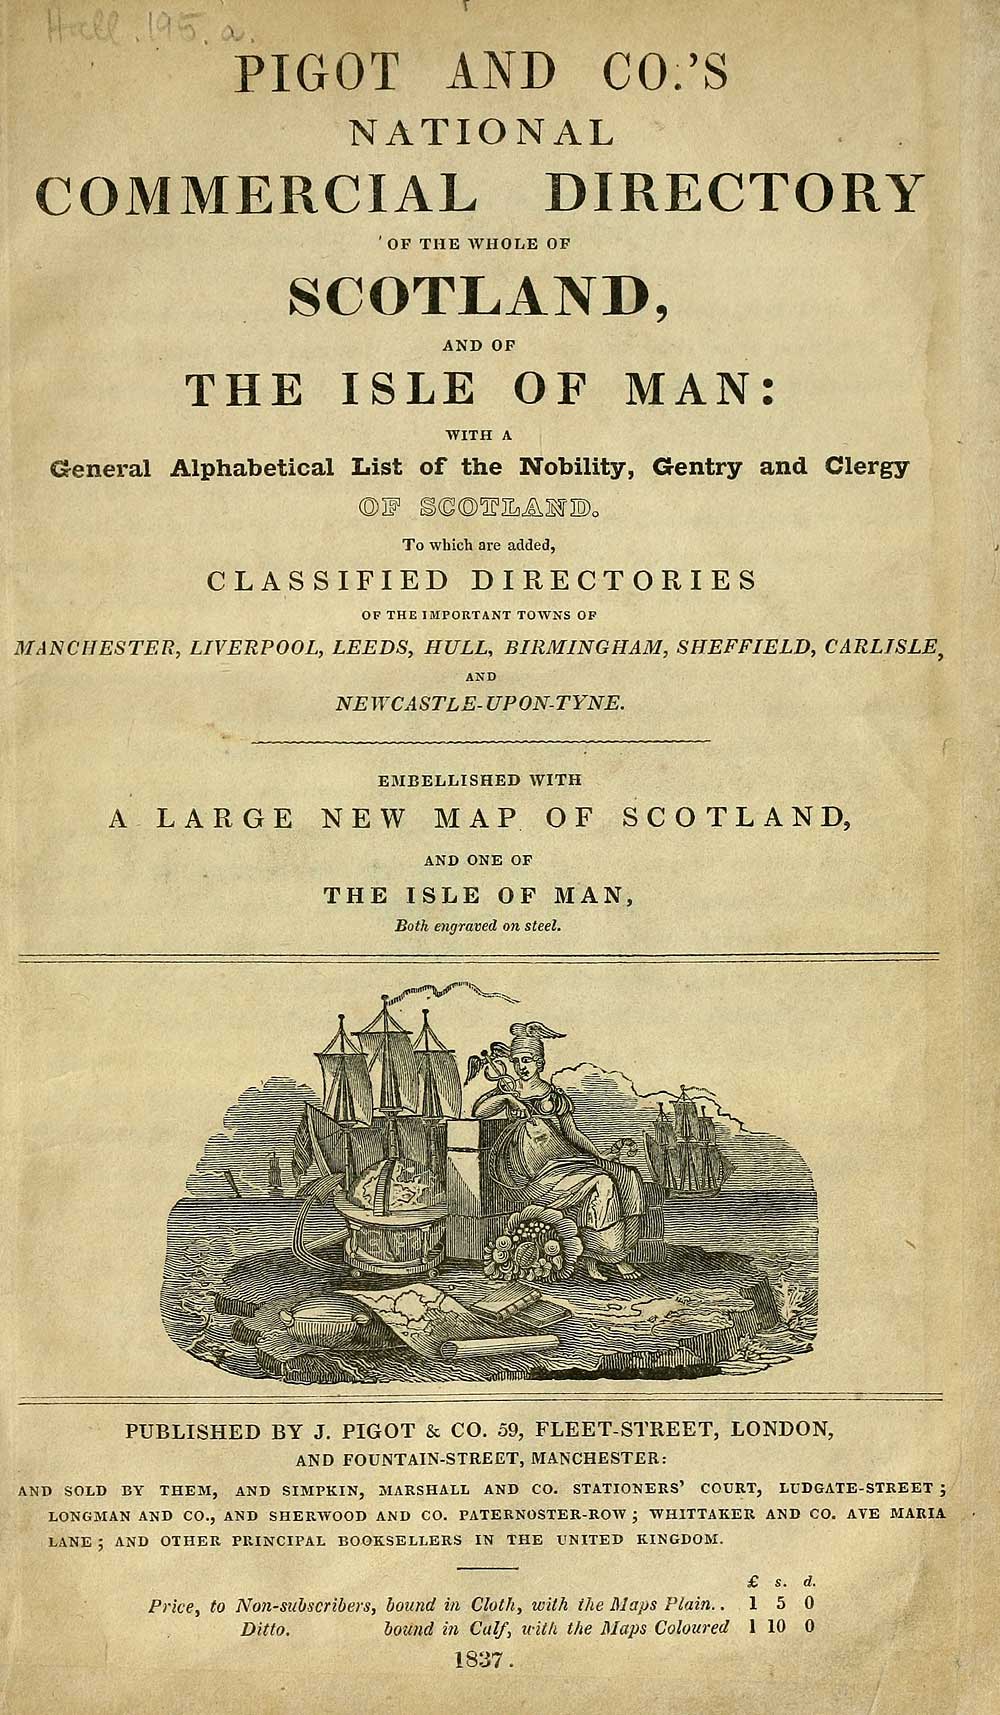 PictureThe frontispiece of Pigot & Co's 1837 Trade Directory for Scotland etc.